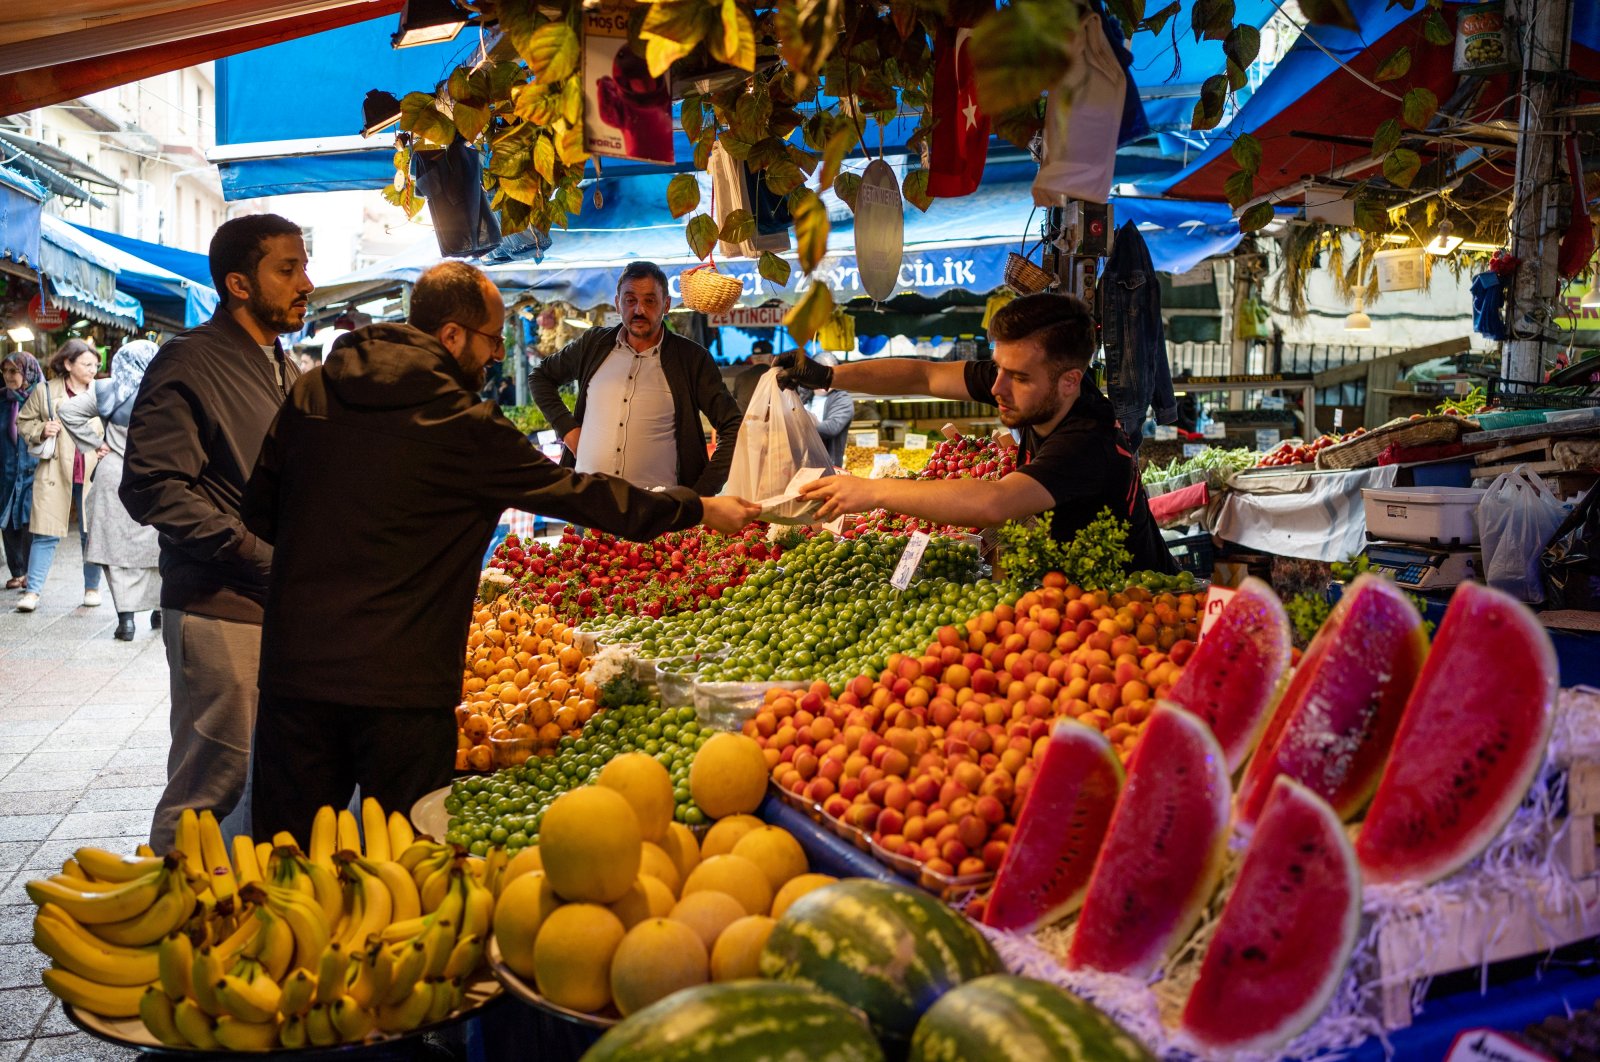 A customer hands a vendor Turkish lira banknotes to pay for goods at a fruit and vegetable stall at a local market in Bursa, Türkiye, May 18, 2023. (Getty Images Photo)